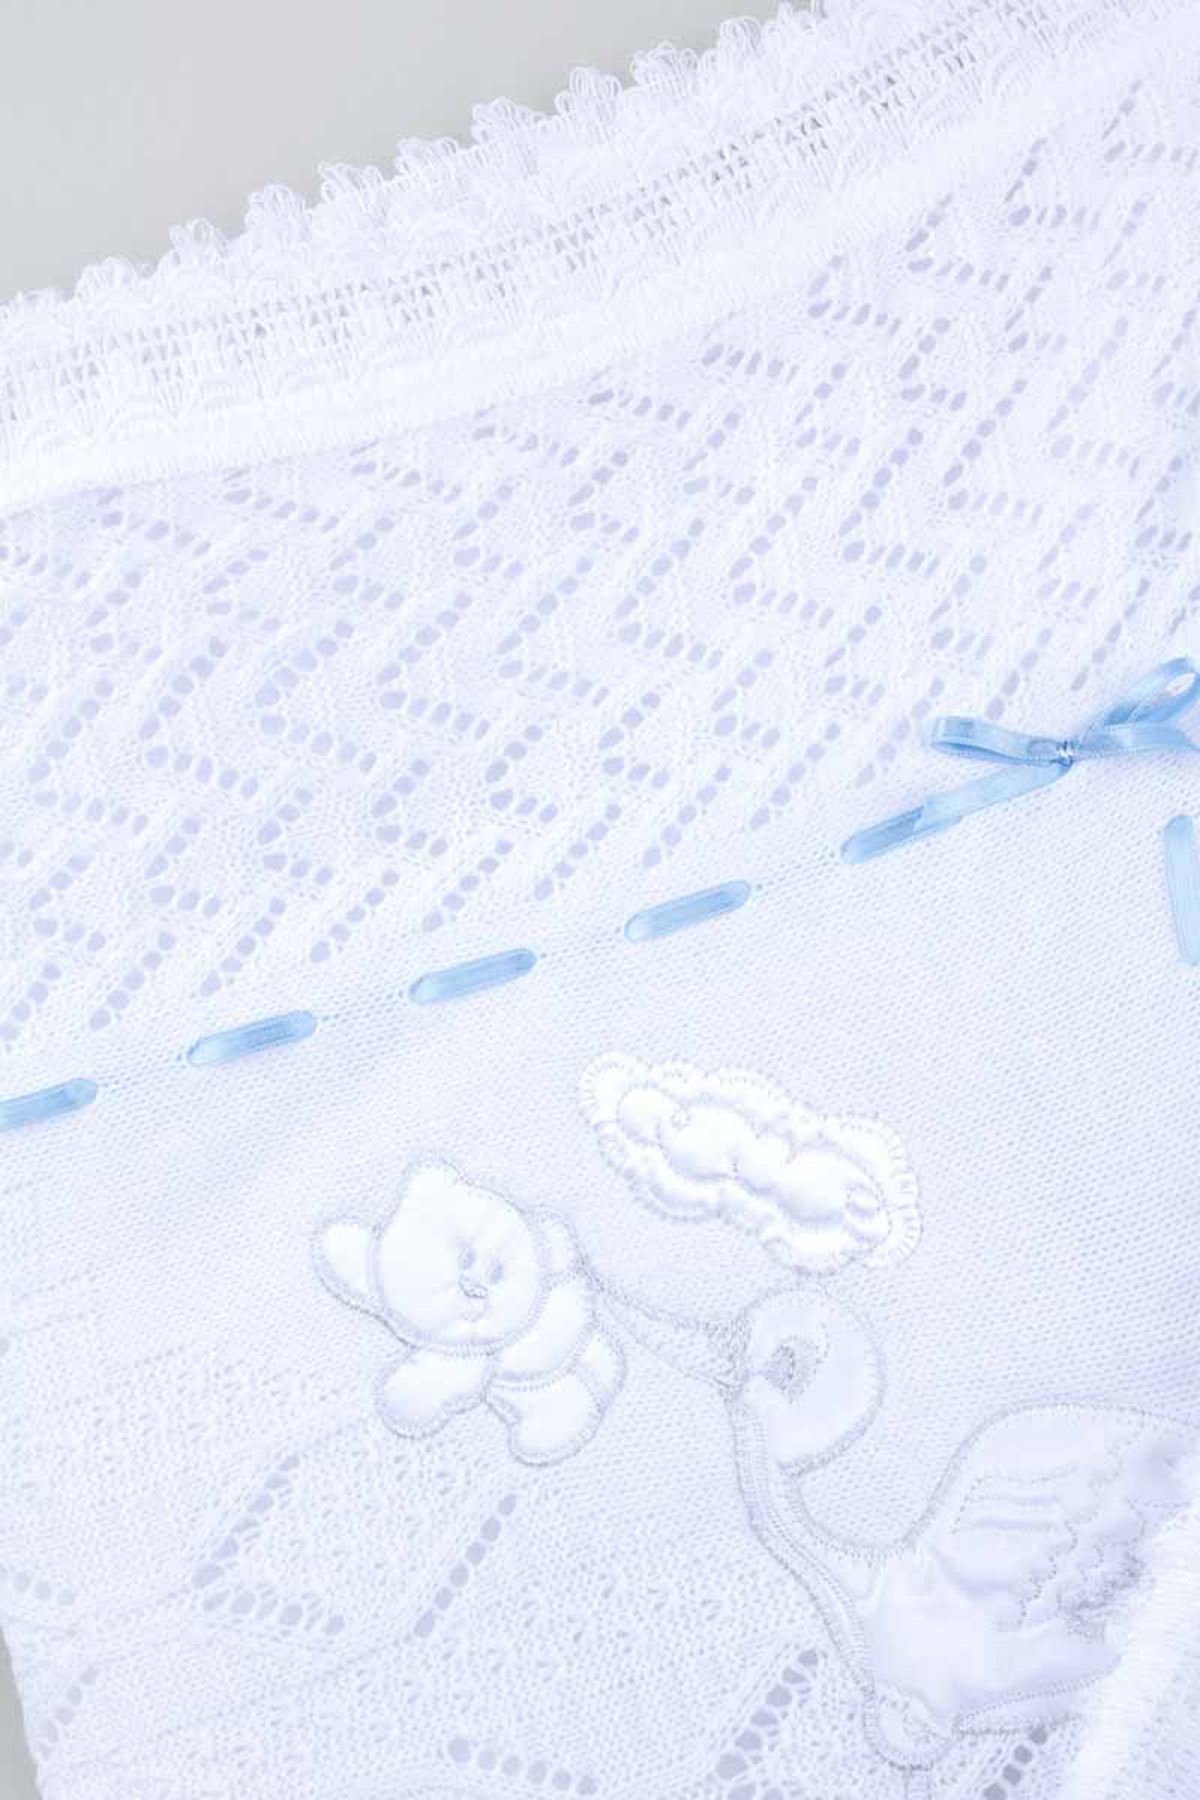 White blue hand knitted knitwear baby blankets for girls boys babies cotton seasonal warm 80*80 cm special blankets model